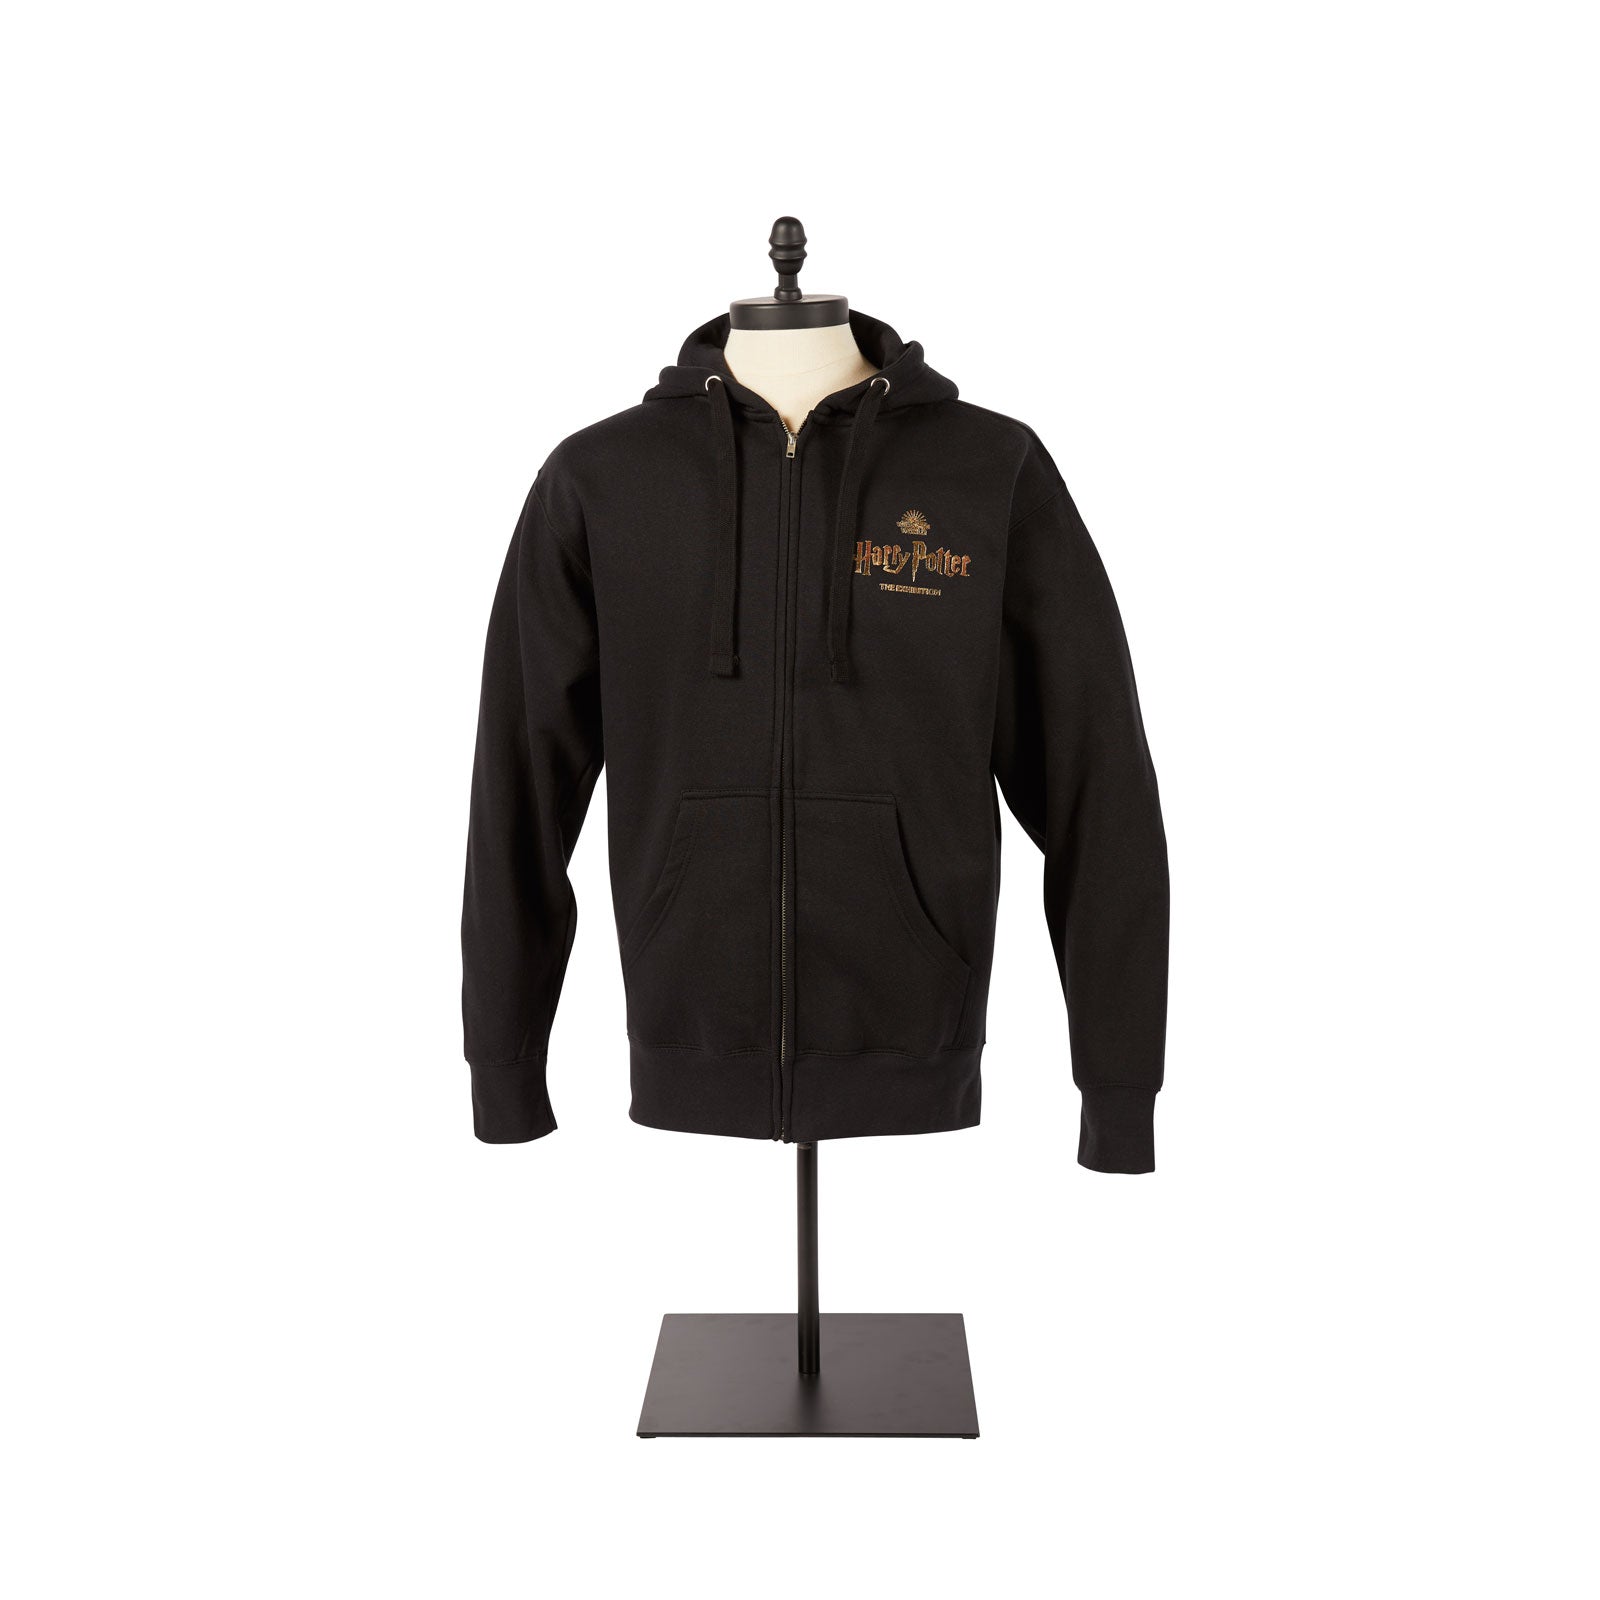 Harry Potter ZIP – The FRONT LOGO EXHIBITION POTTER™ HARRY HOODIE Exhibition THE